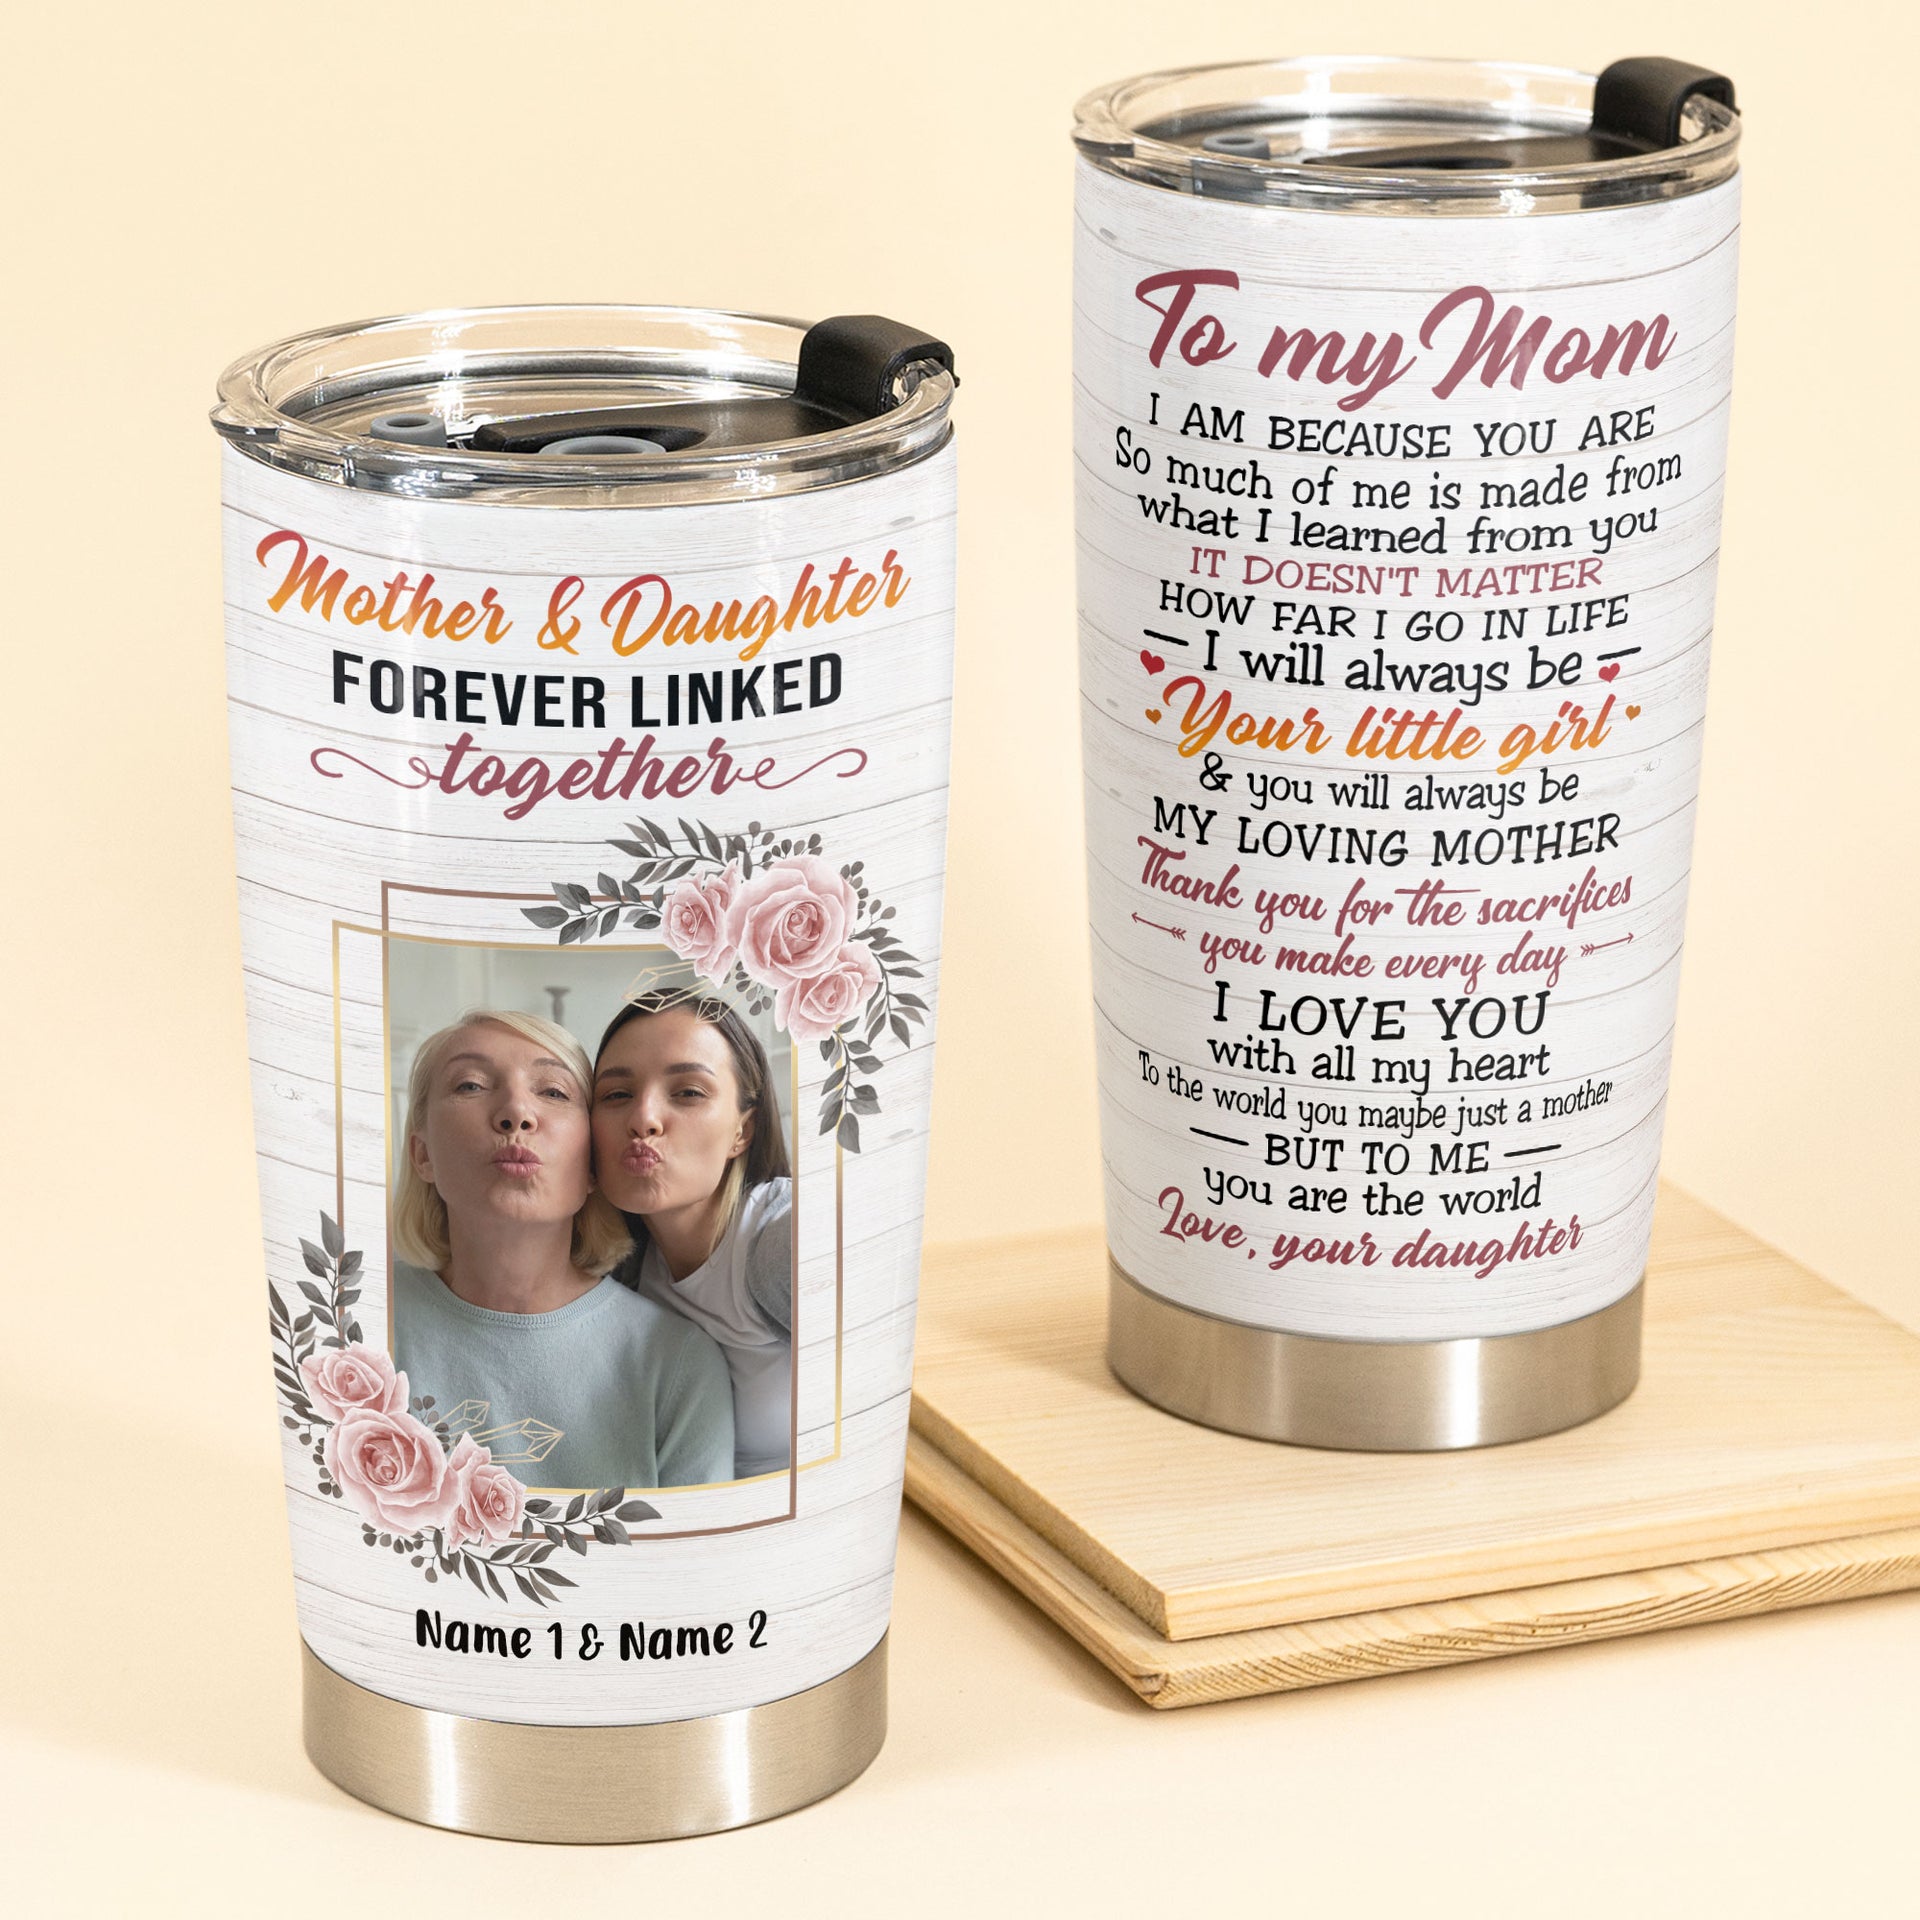 https://macorner.co/cdn/shop/products/Mother-And-Daughter-Forever-Linked-Together-Personalized-Tumbler-Cup-Gift-For-Mom-1.jpg?v=1629152238&width=1920